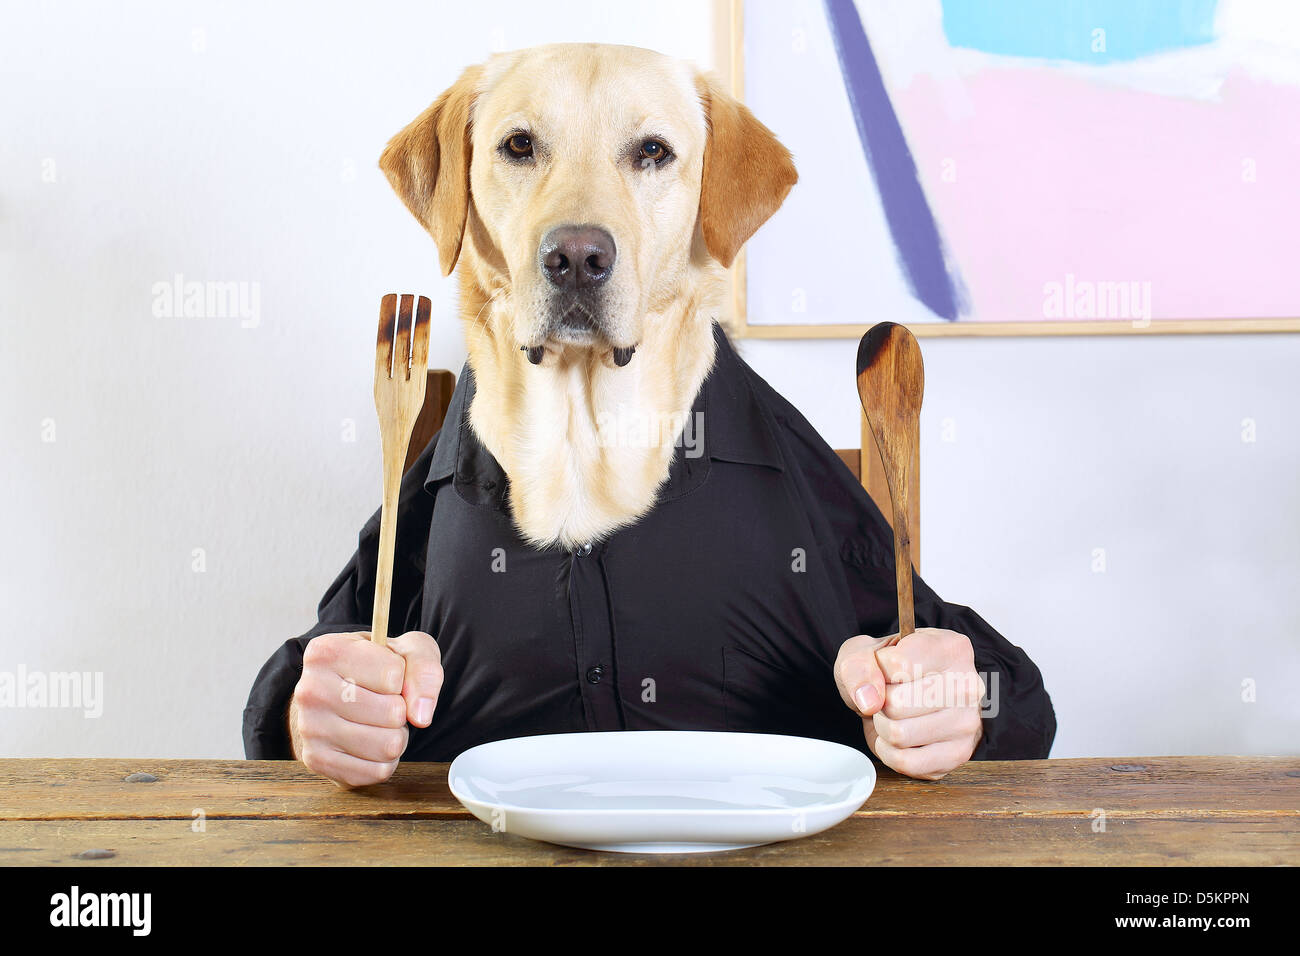 dog's head and hands human being with wooden cutlery Stock Photo